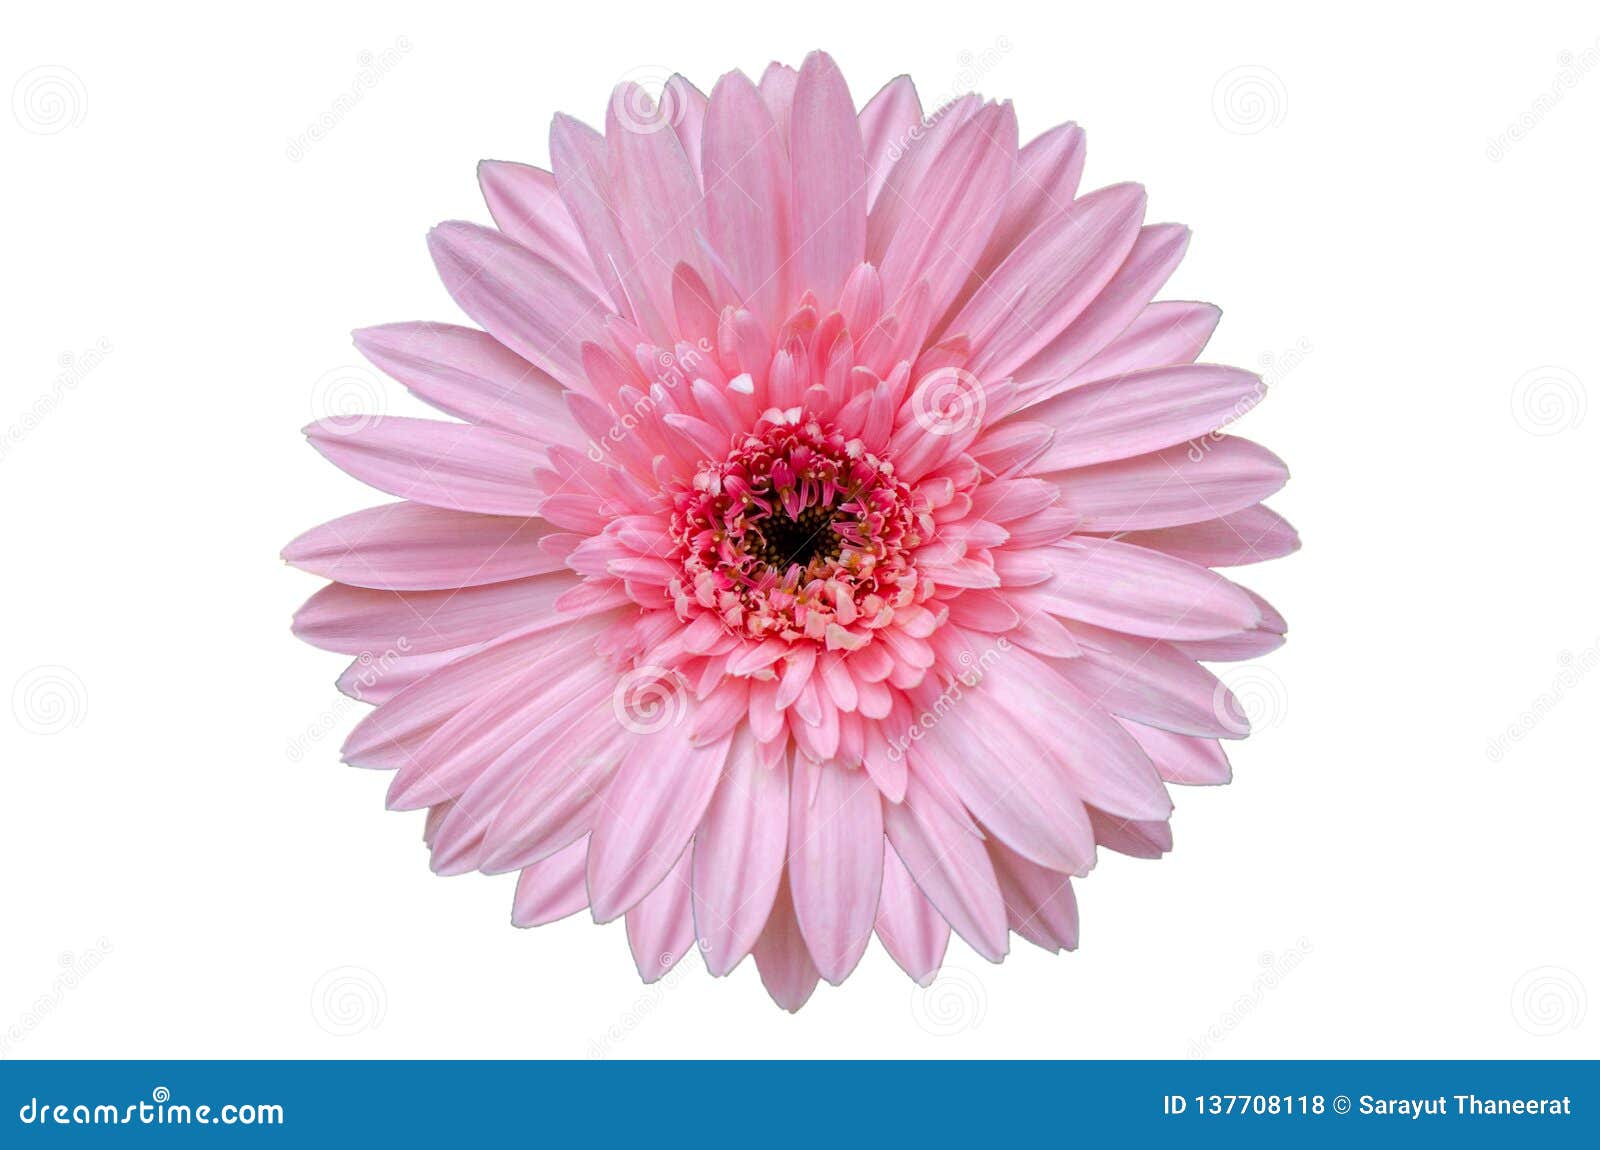 pink flower isolate white background